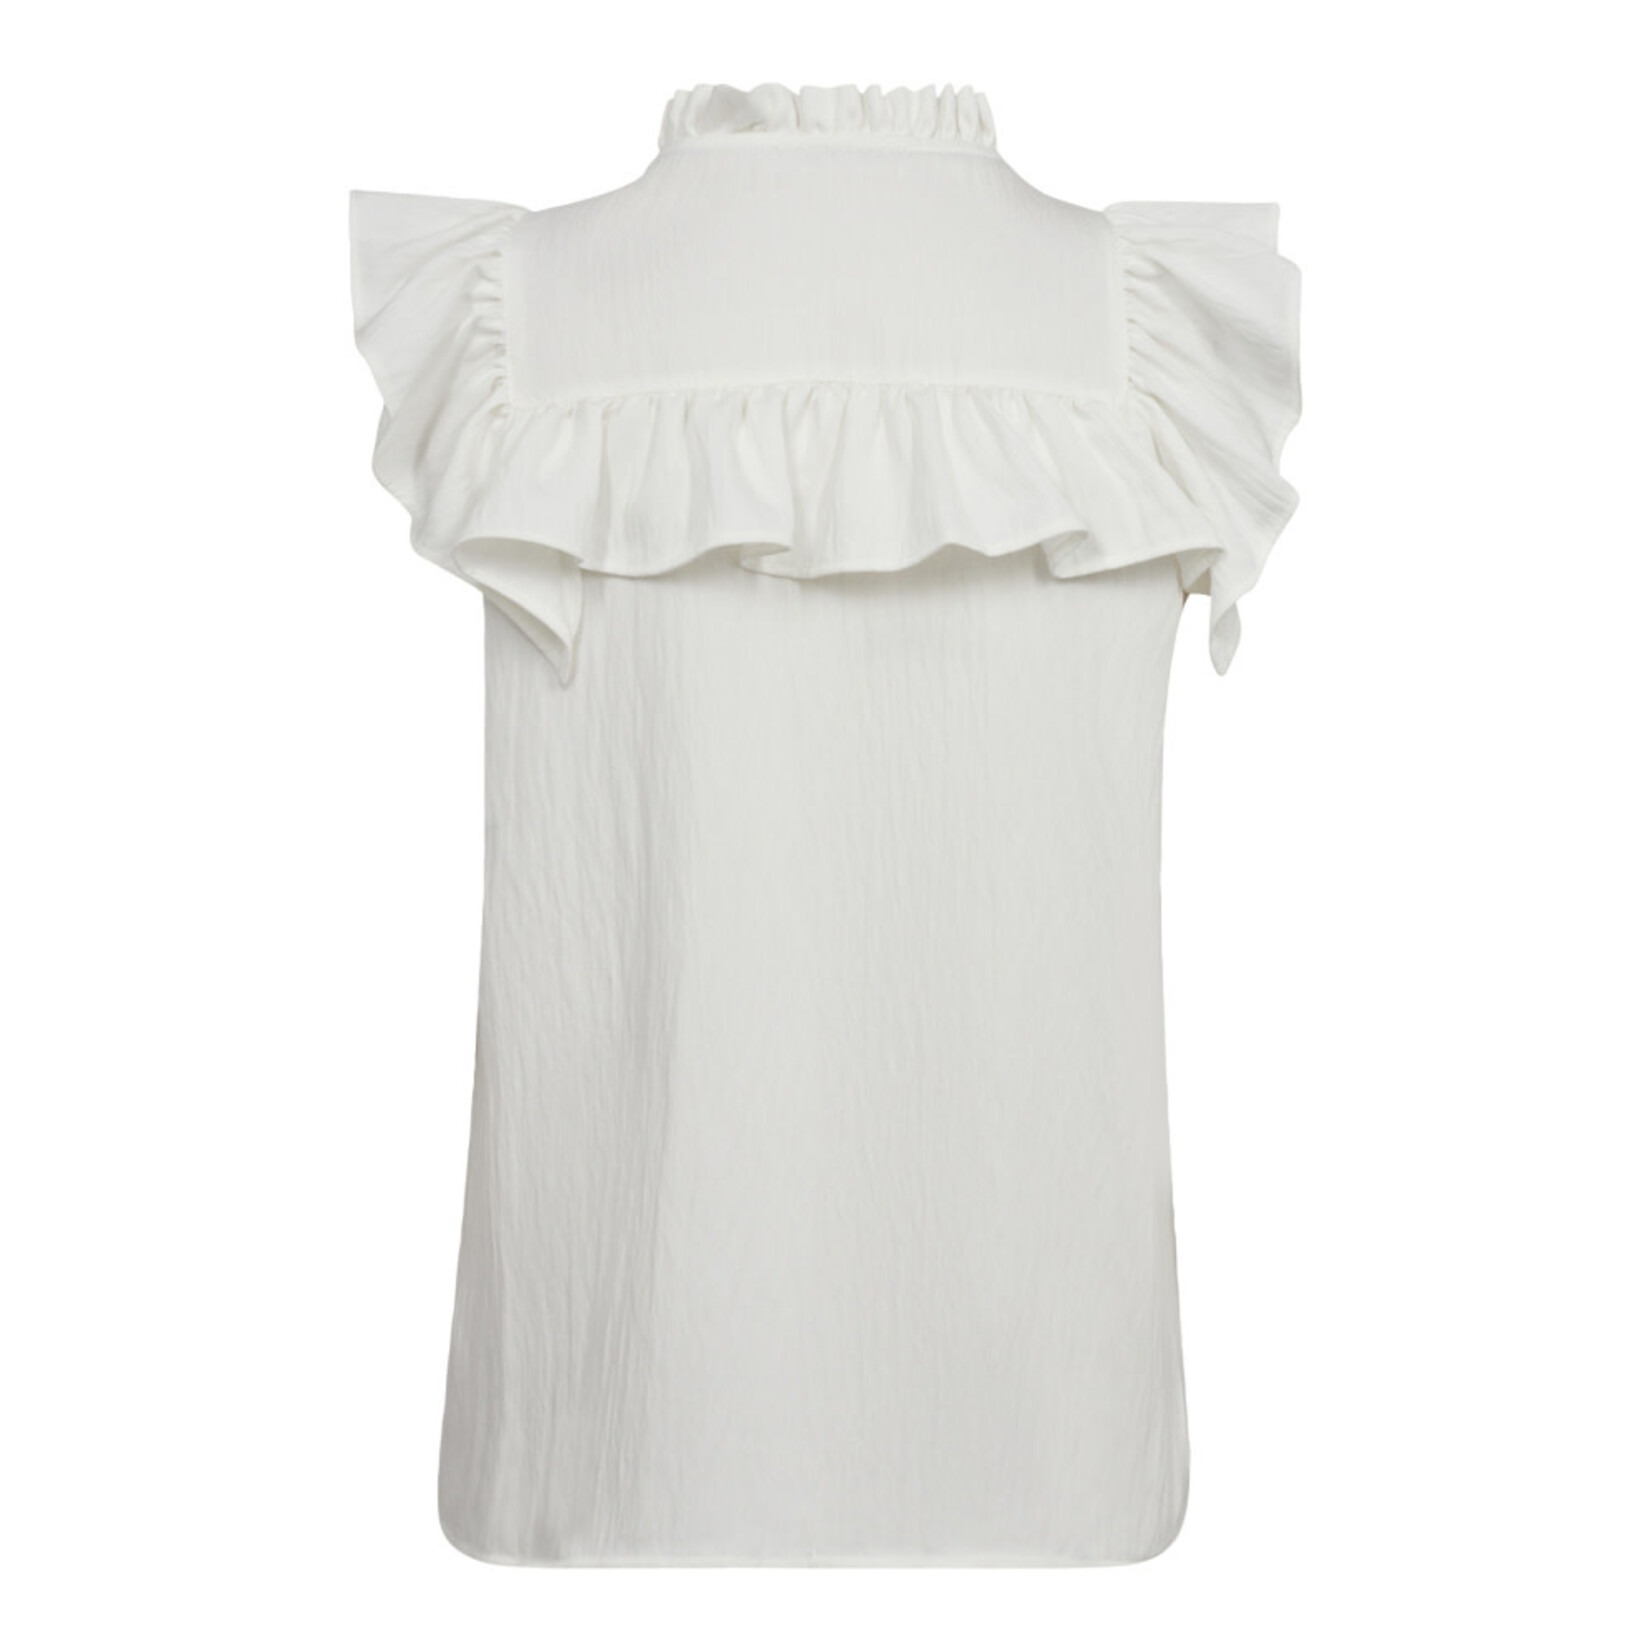 Co'couture Sueda pin tuck top White